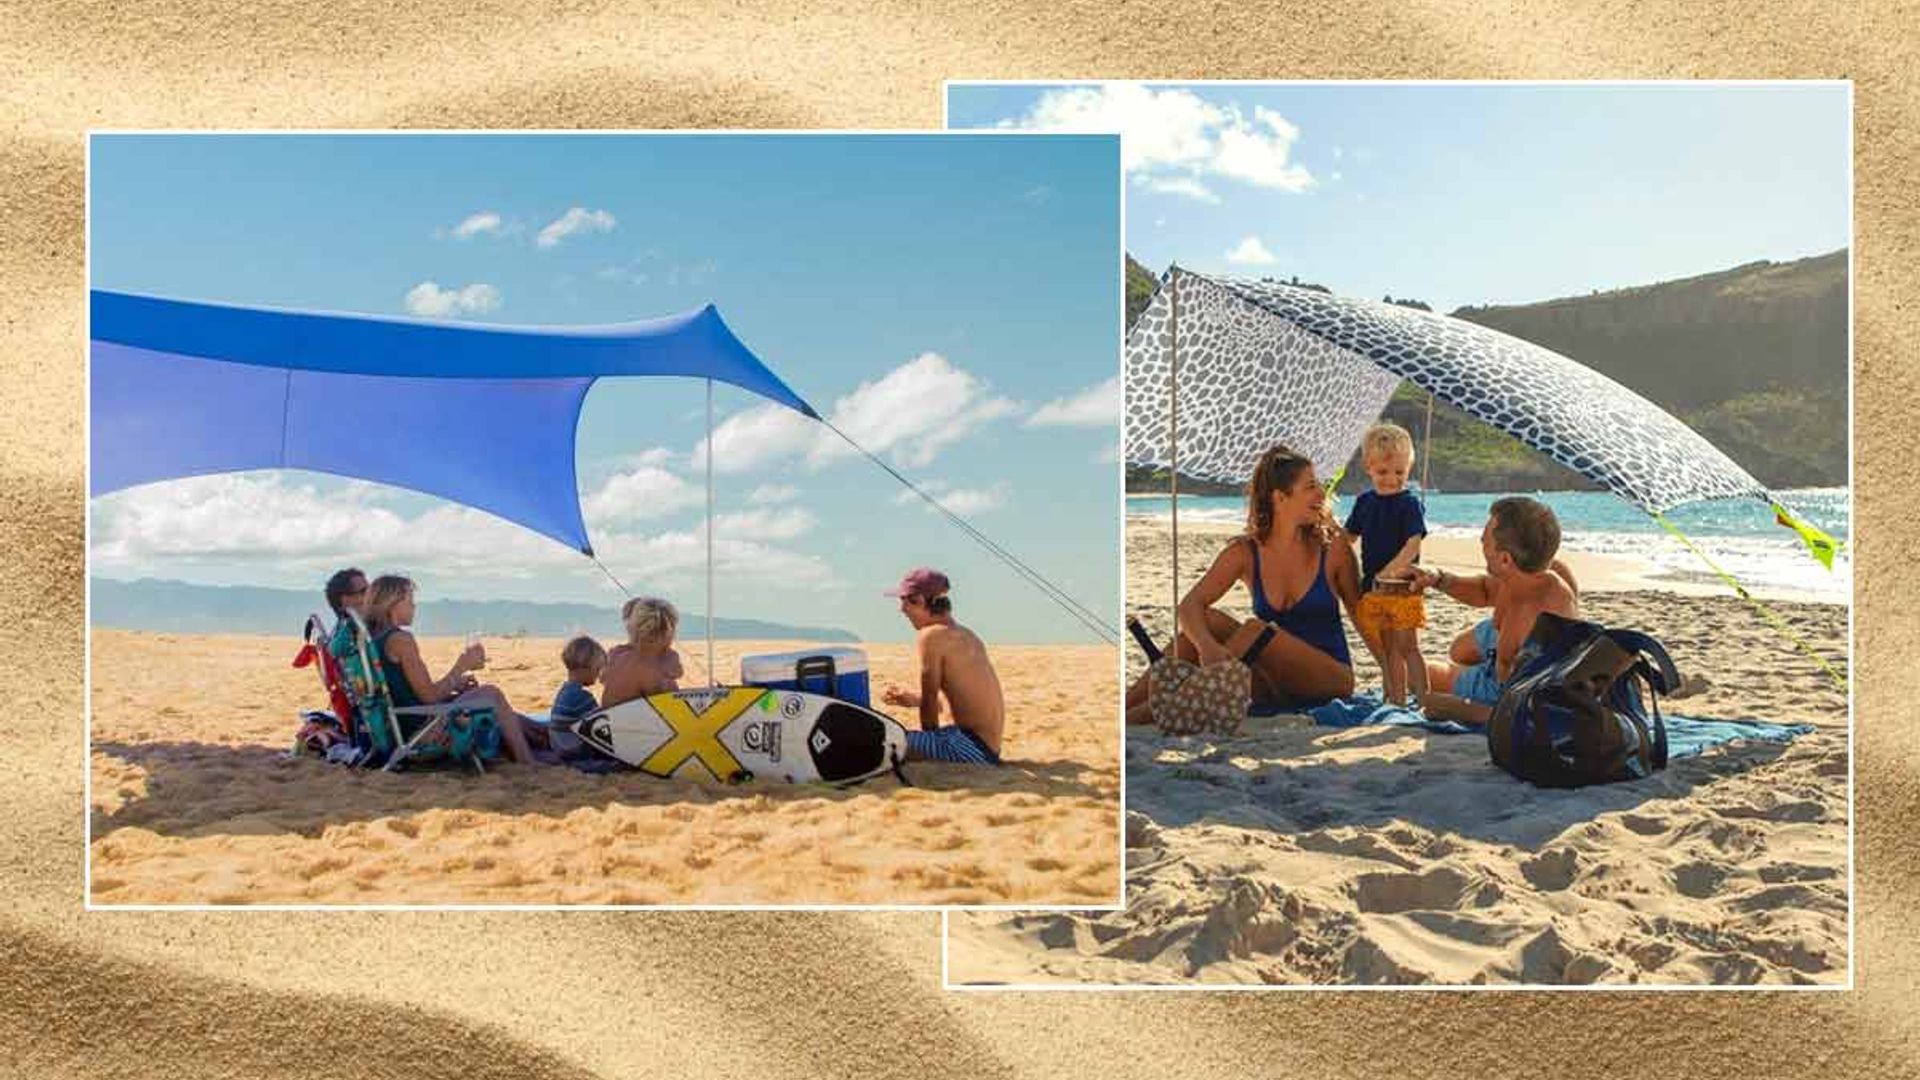 10 best beach tents to buy in 2022 to up your holiday game